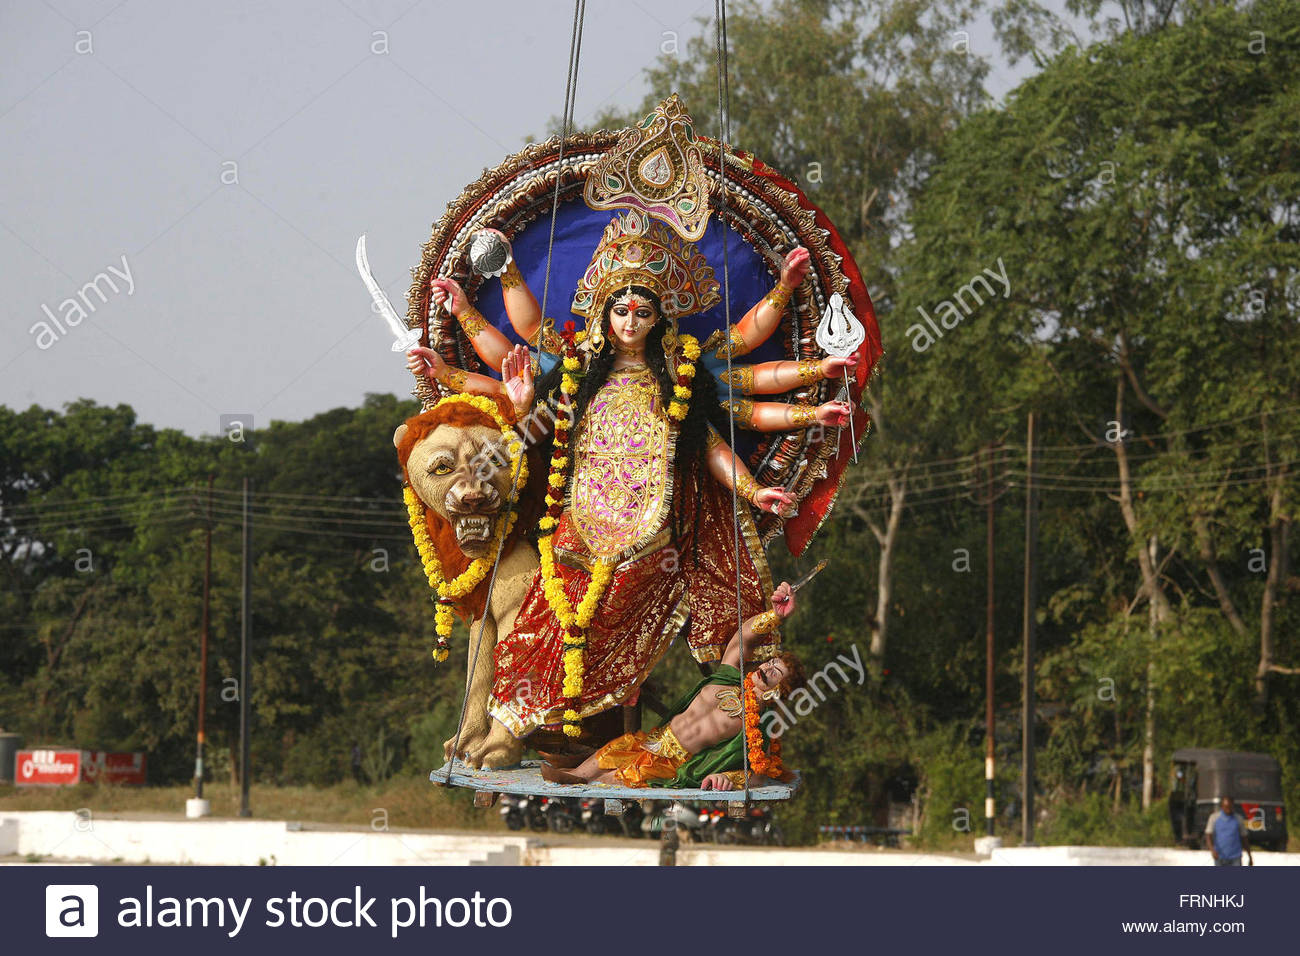 an-idol-of-goddess-durga-is-lifted-by-a-crane-for-immersion-in-the-frnhkj